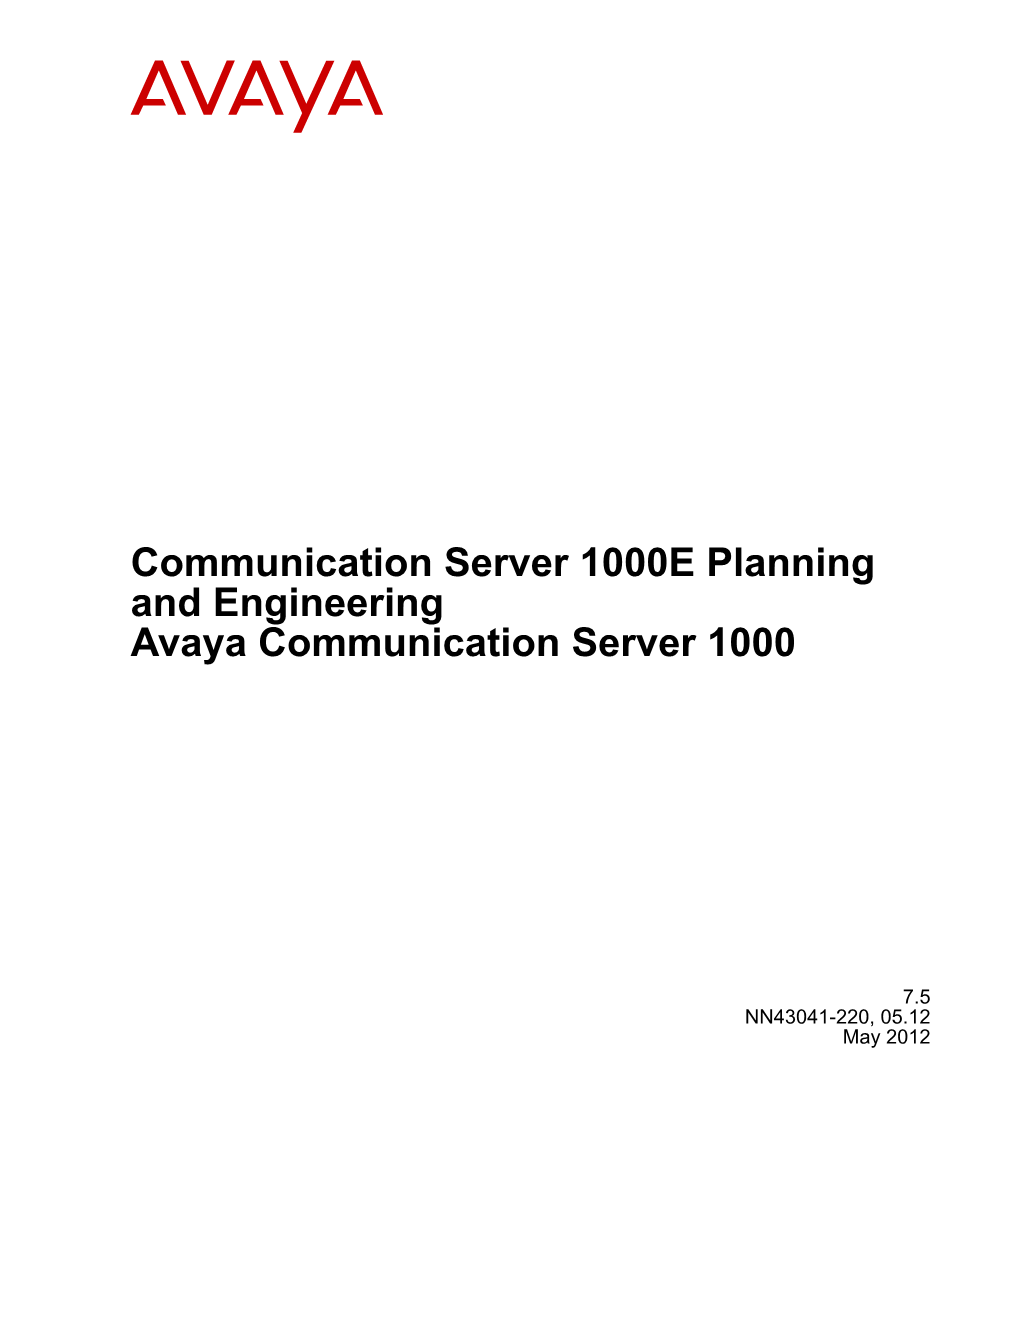 Communication Server 1000E Planning and Engineering Avaya Communication Server 1000